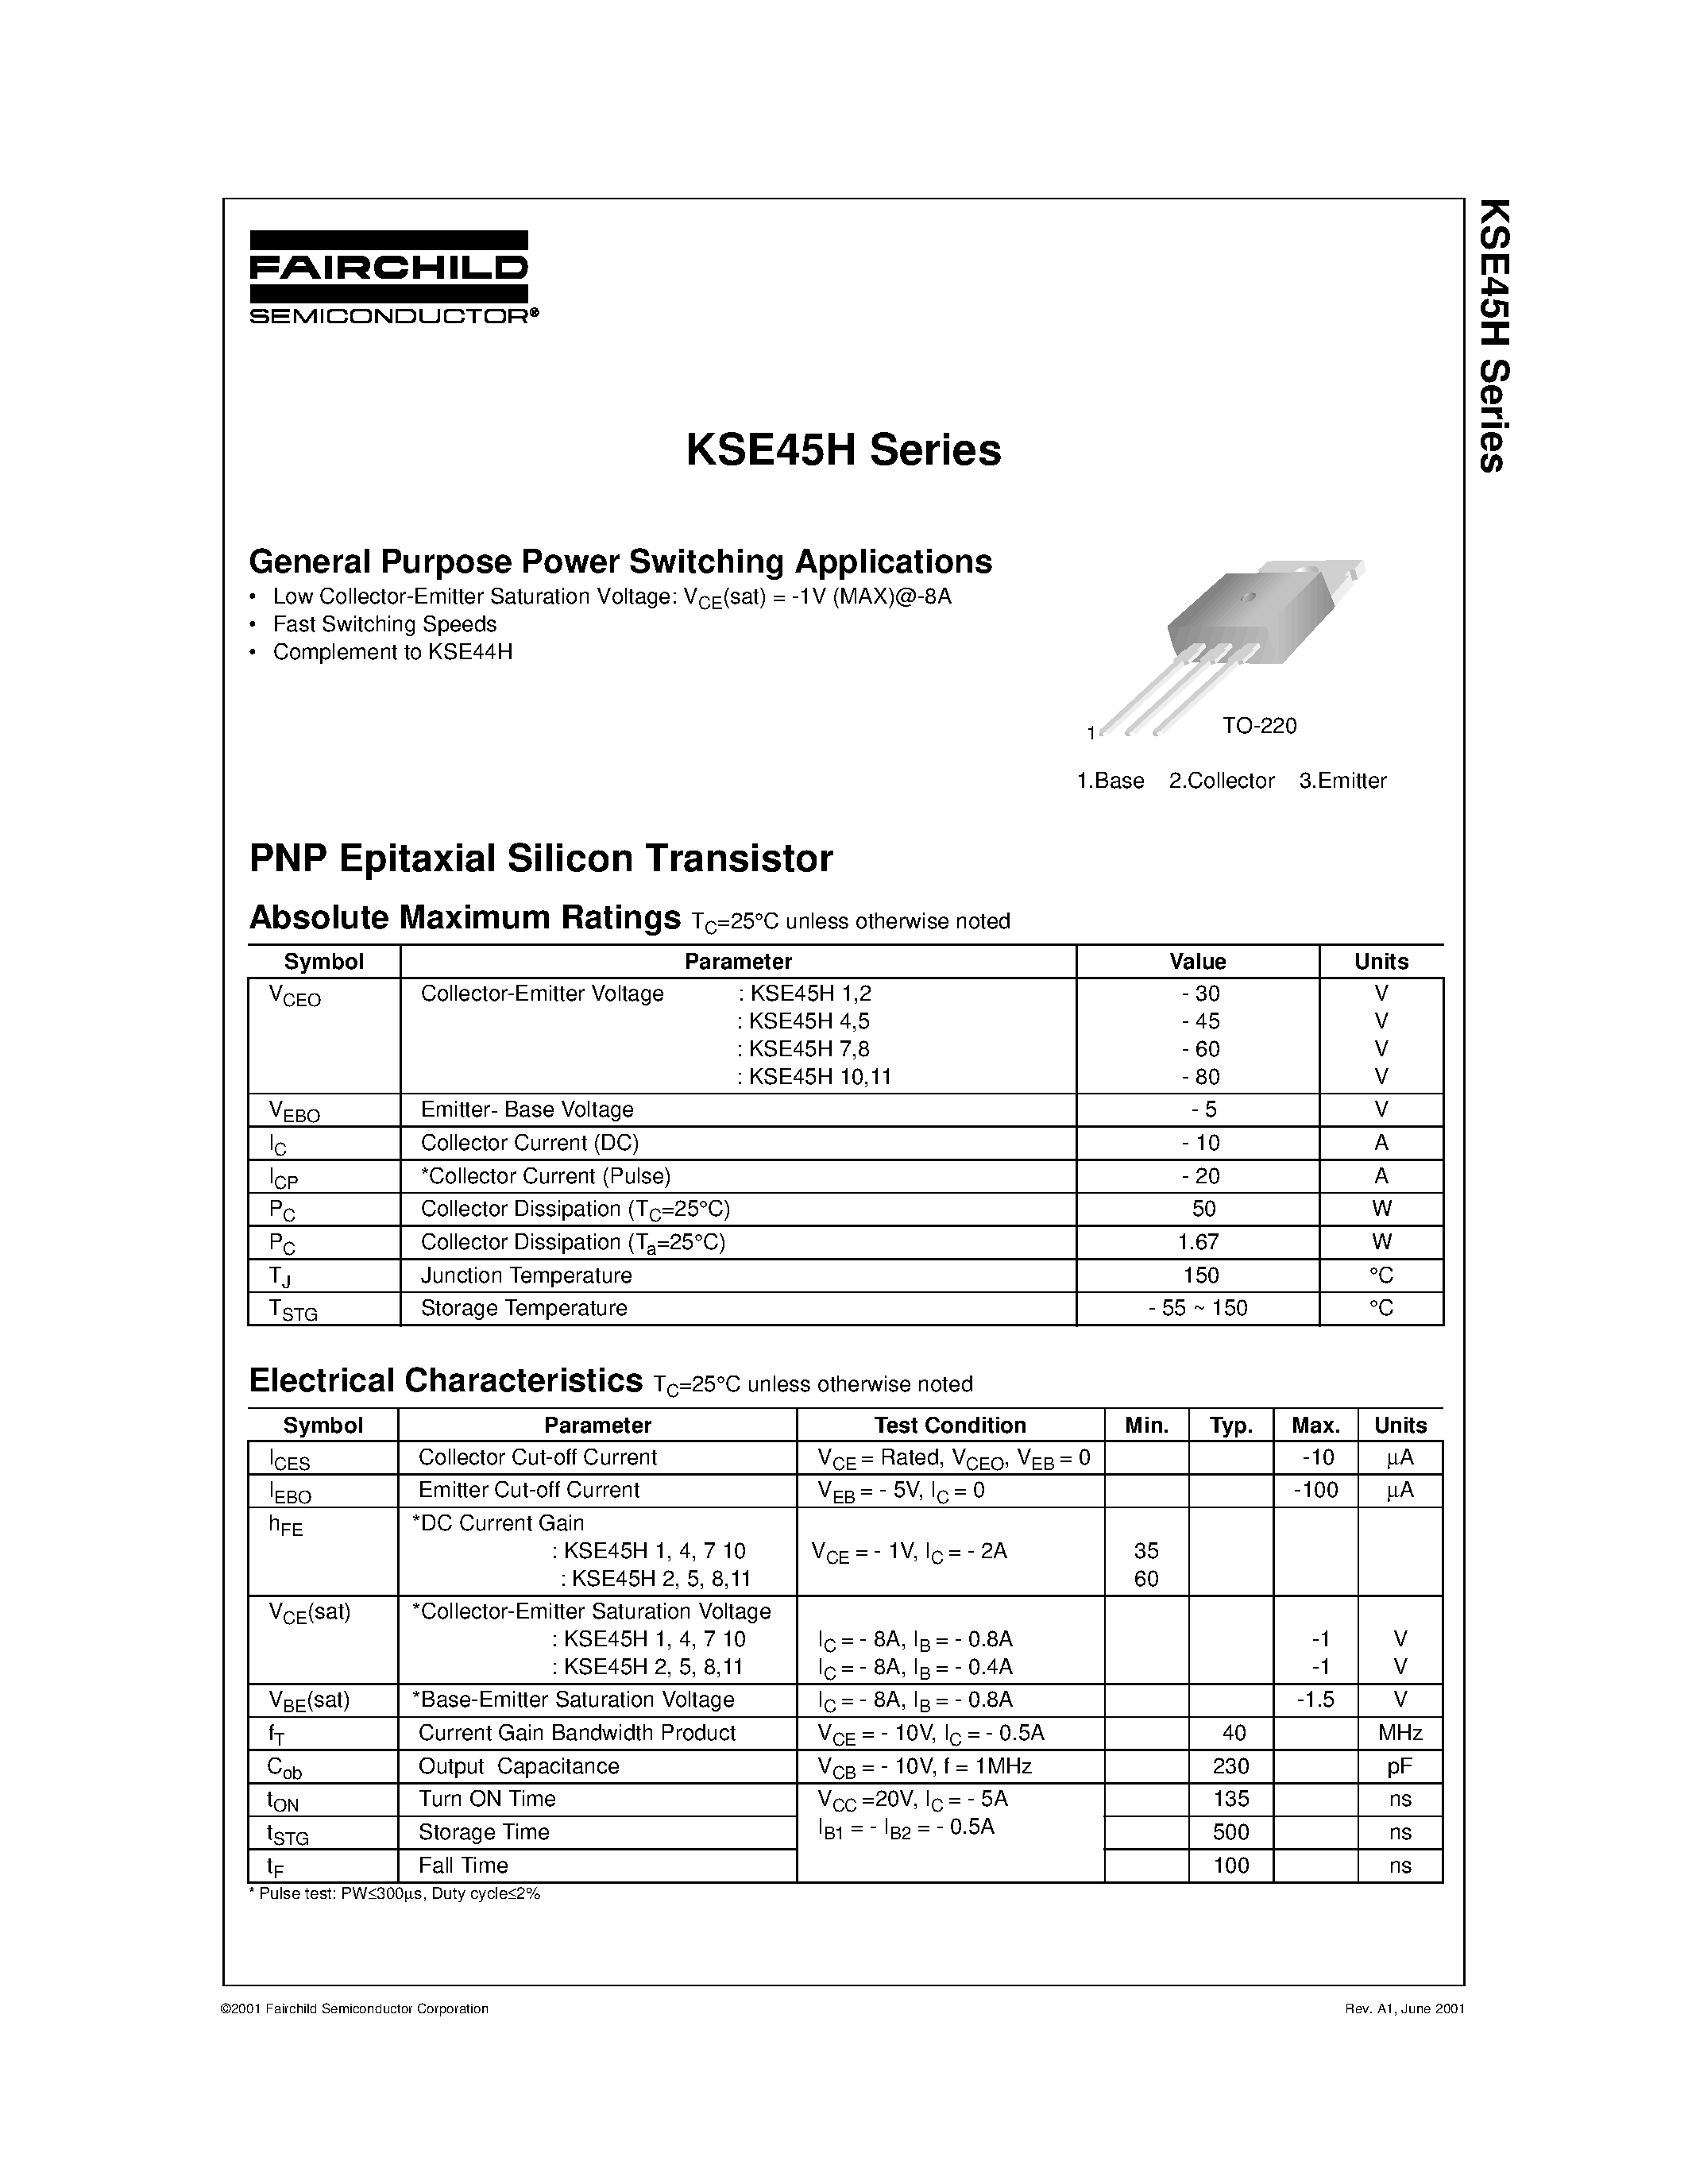 Даташит KSE45H4 - General Purpose Power Switching Applications страница 1